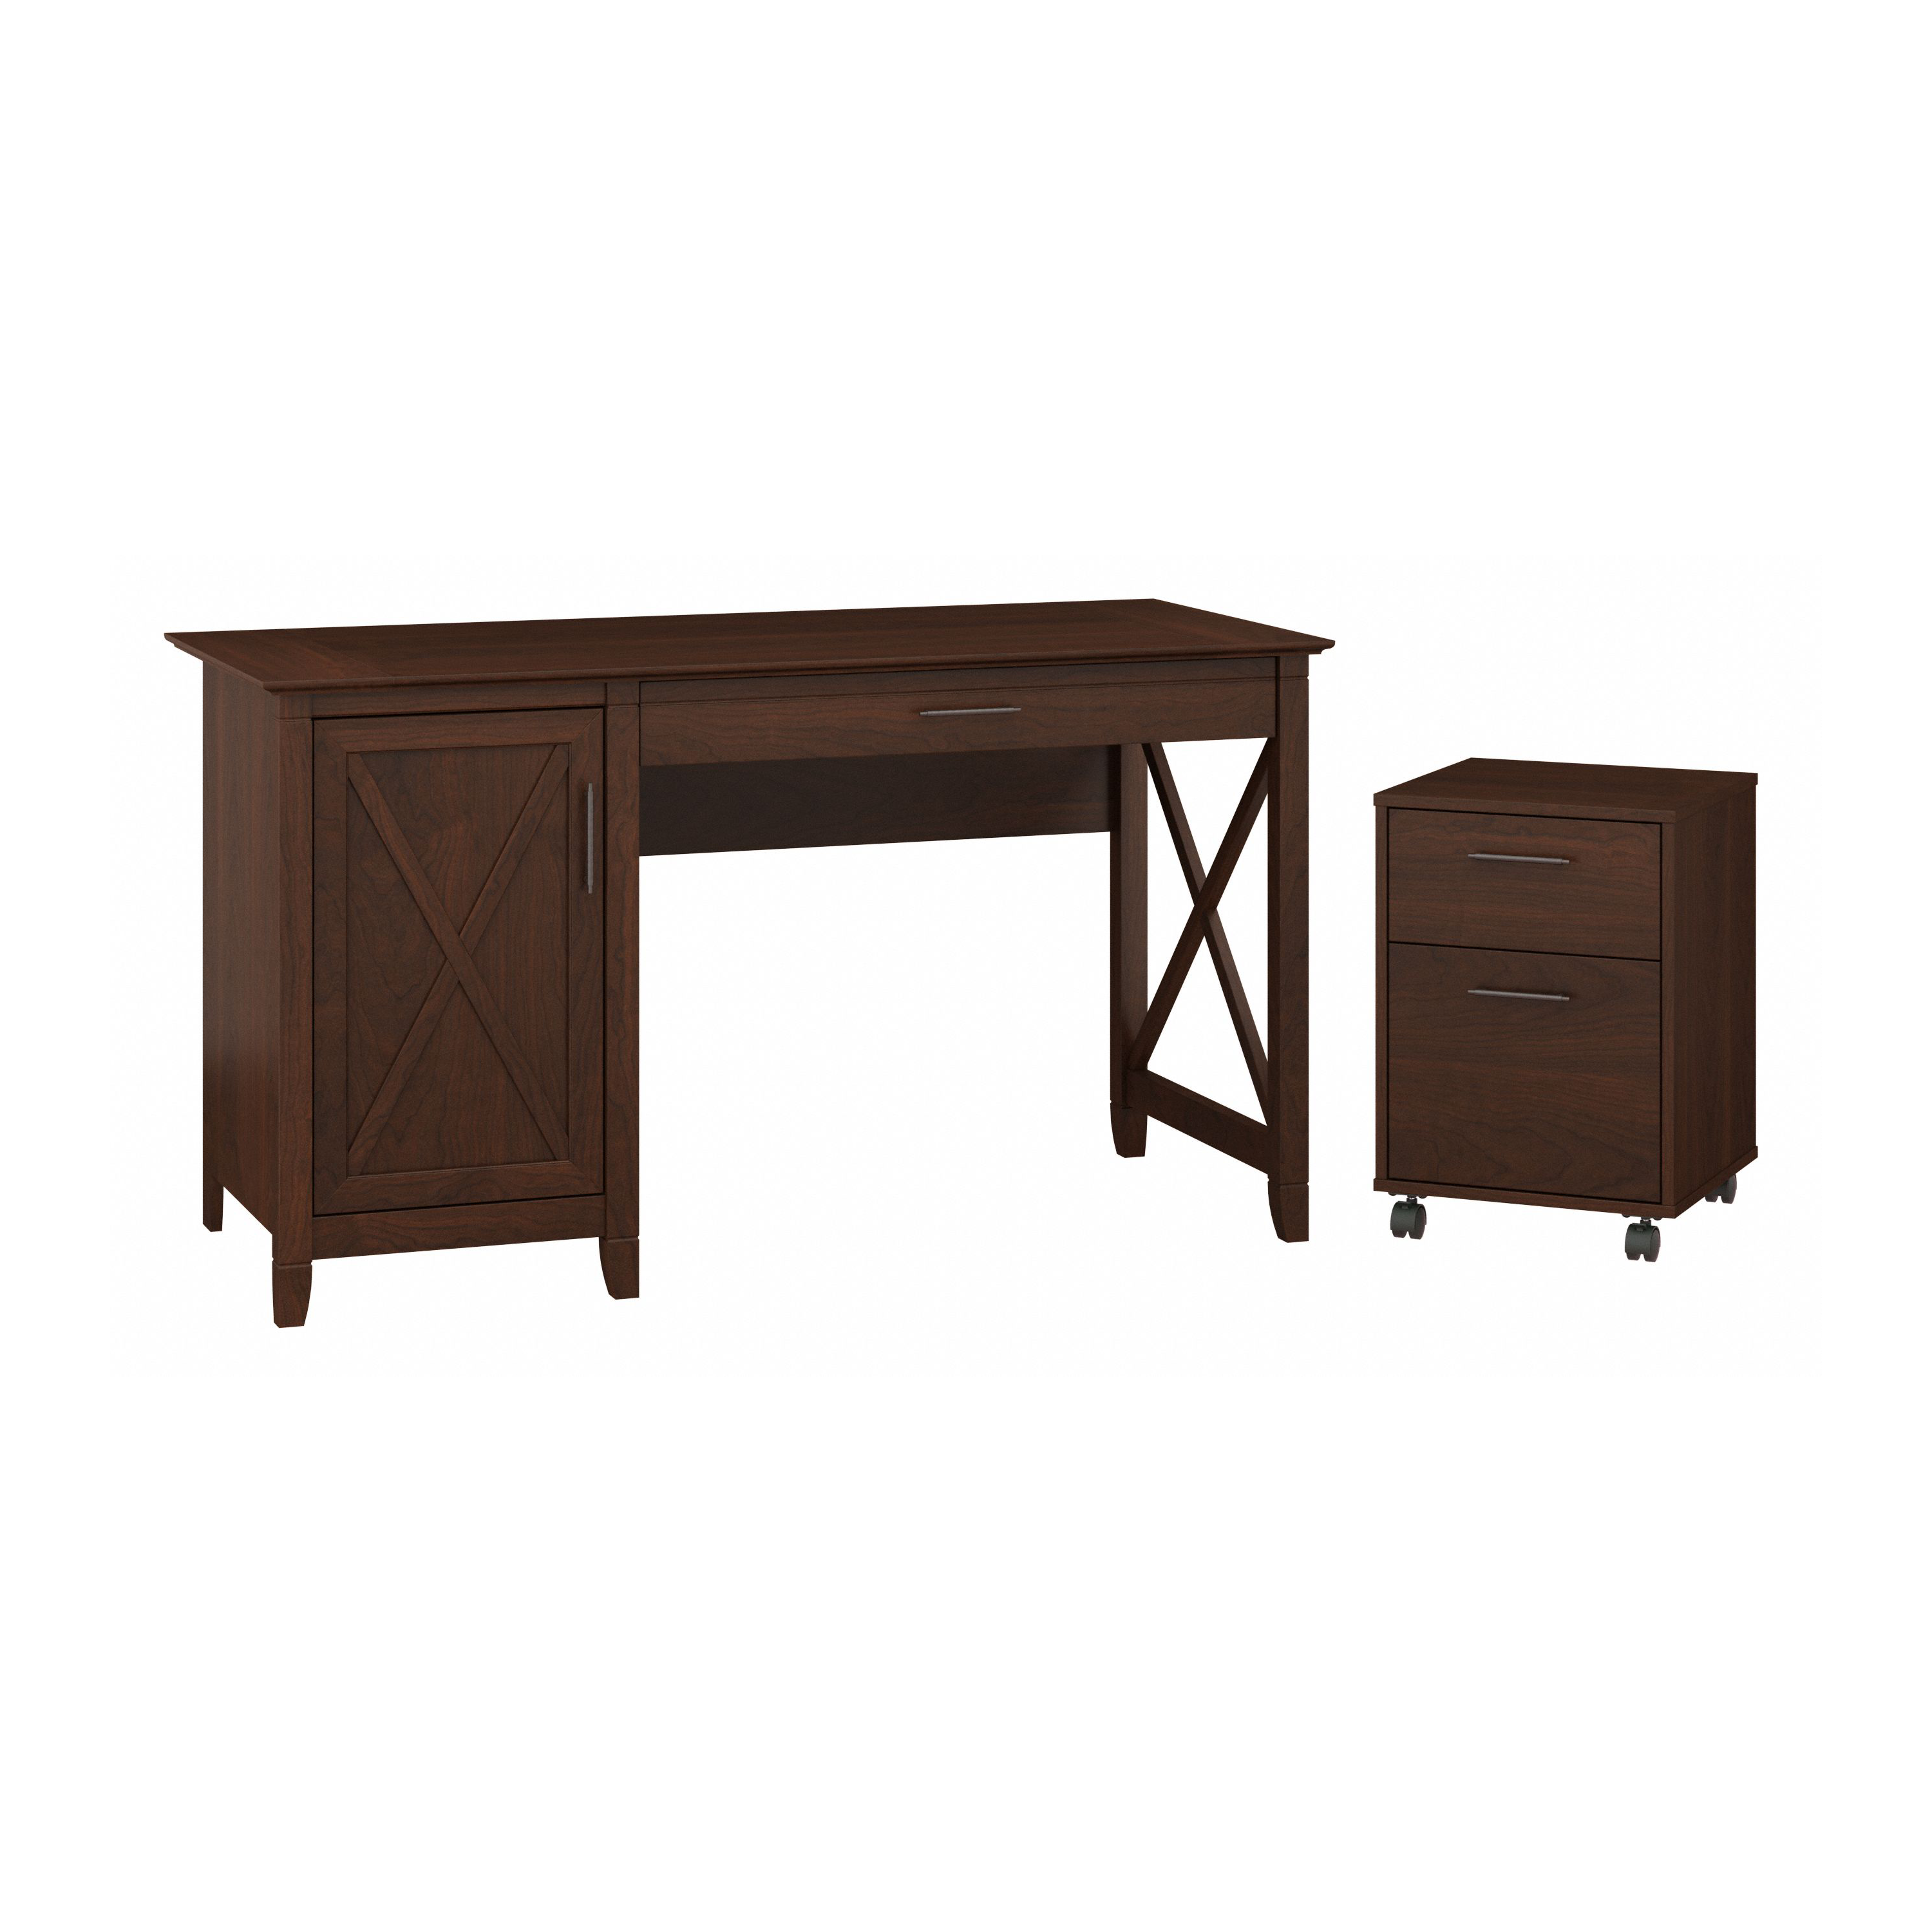 Shop Bush Furniture Key West 54W Computer Desk with Storage and 2 Drawer Mobile File Cabinet 02 KWS006BC #color_bing cherry